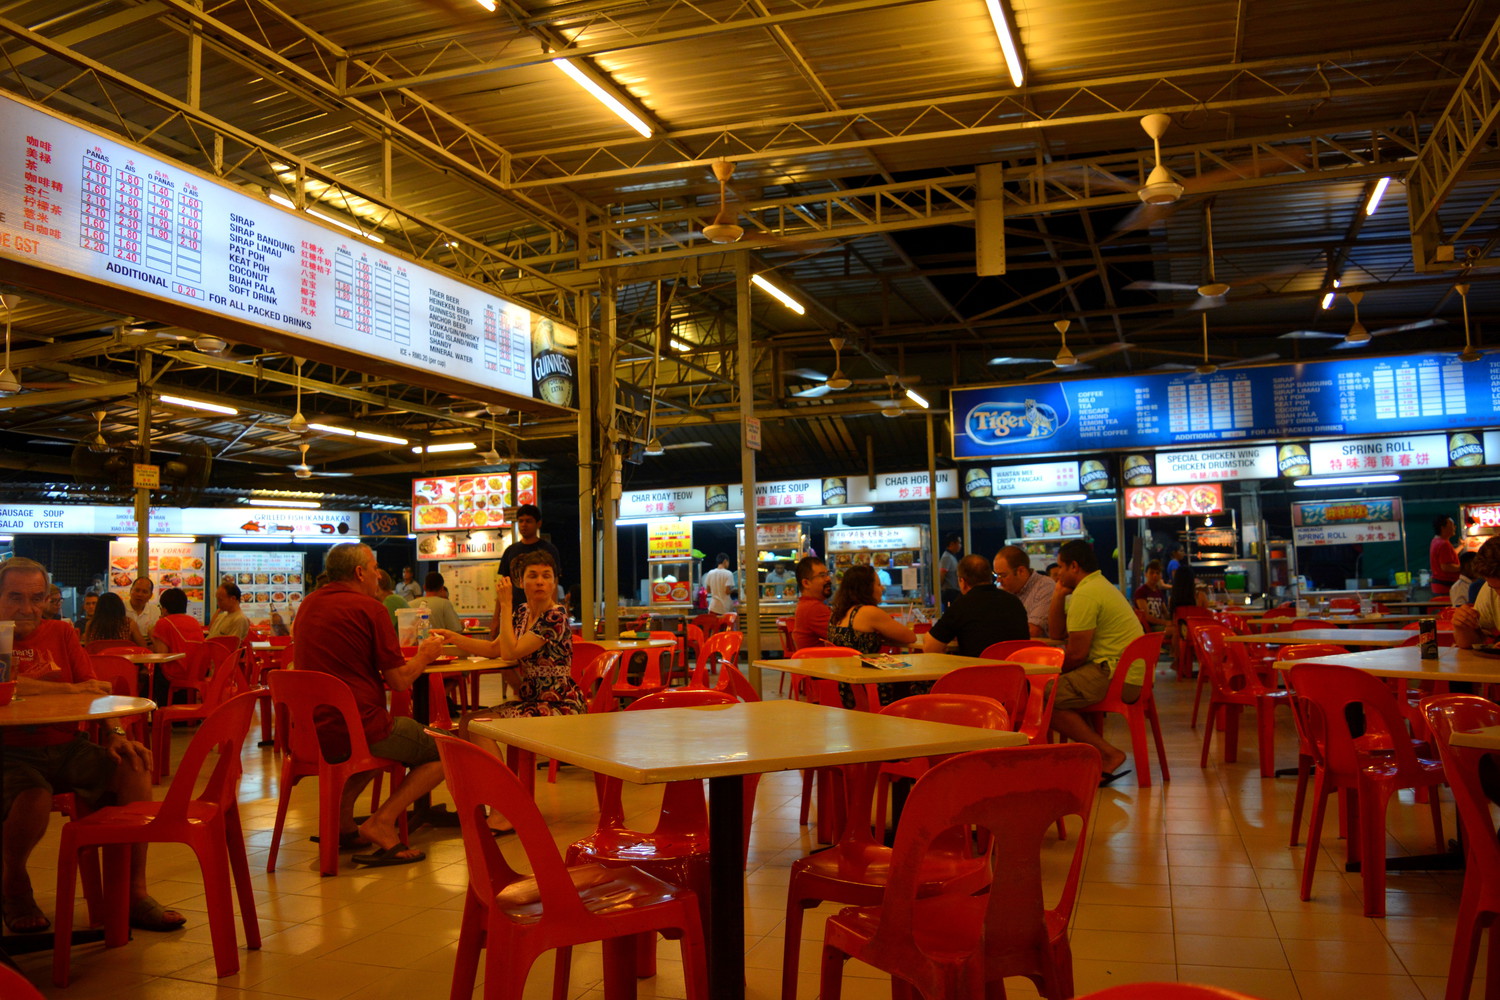 The interior of a food court with chairs, tables, and guests, and large menu posters near the ceiling